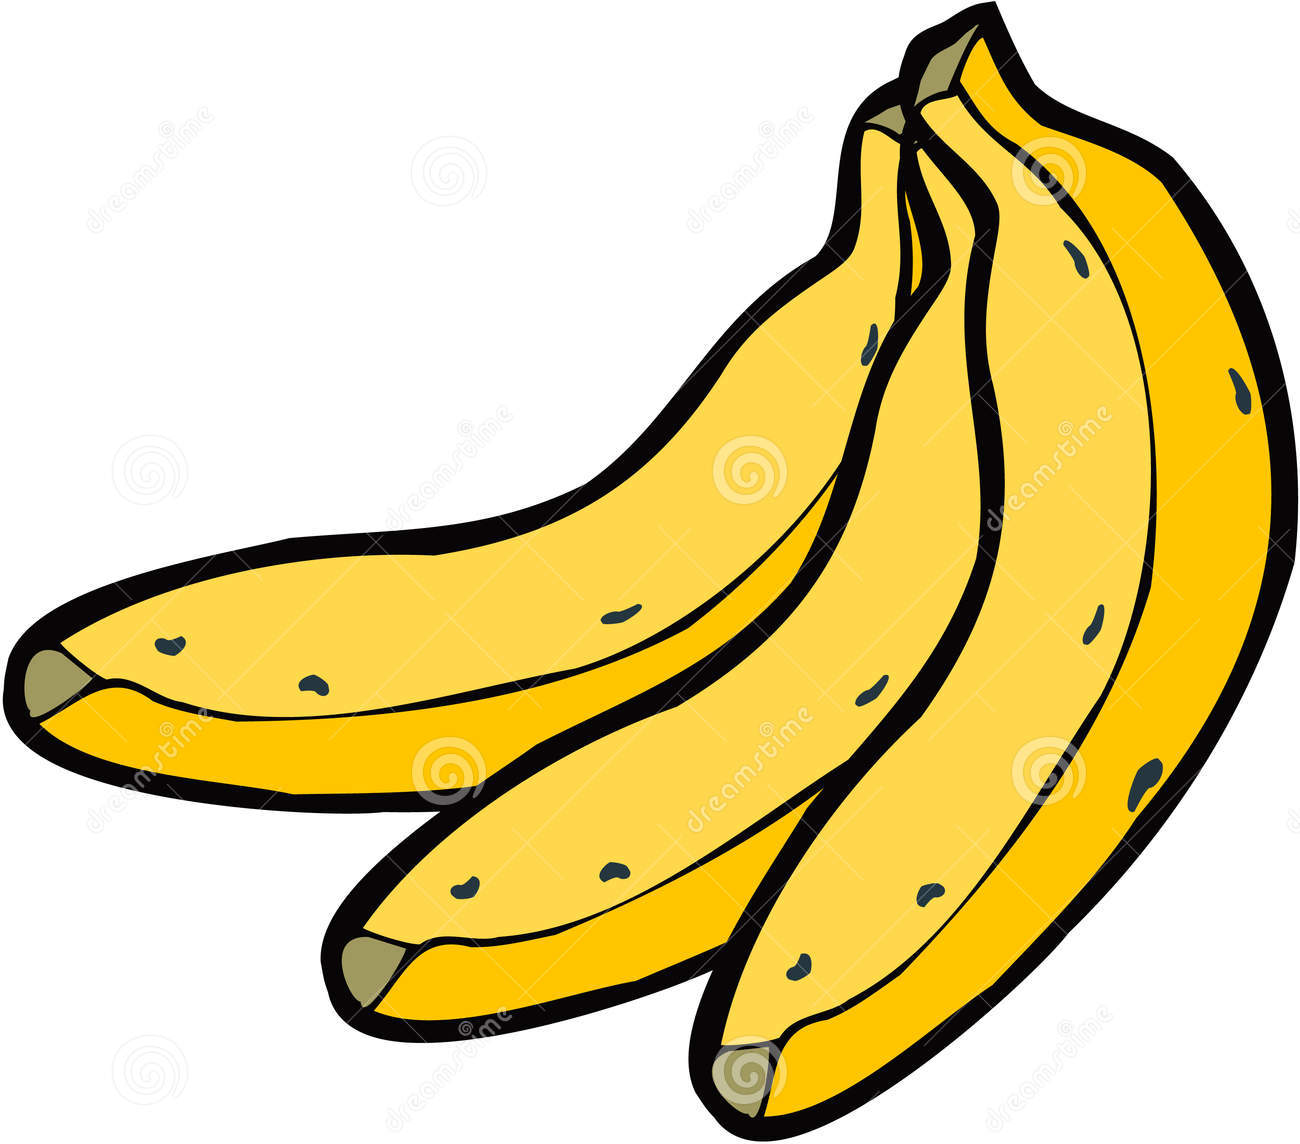 Banana Clipart Black And White - Free Clipart Images